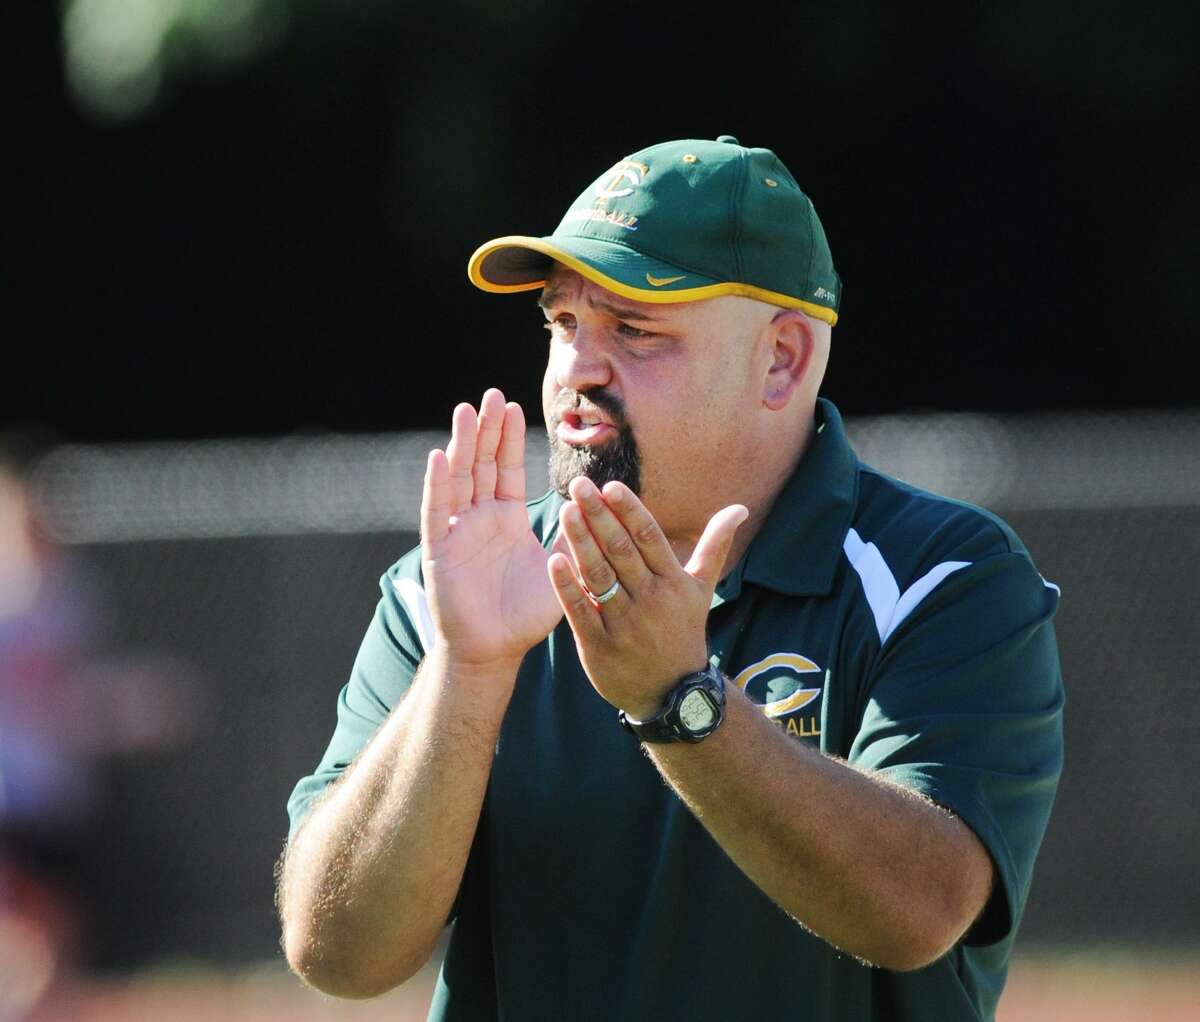 Donny Panapada, the Trinity Catholic High School football coach, during the game between Greenwich High School and Trinity Catholic High School at Greenwich, Conn., Saturday, Sept. 15, 2018.